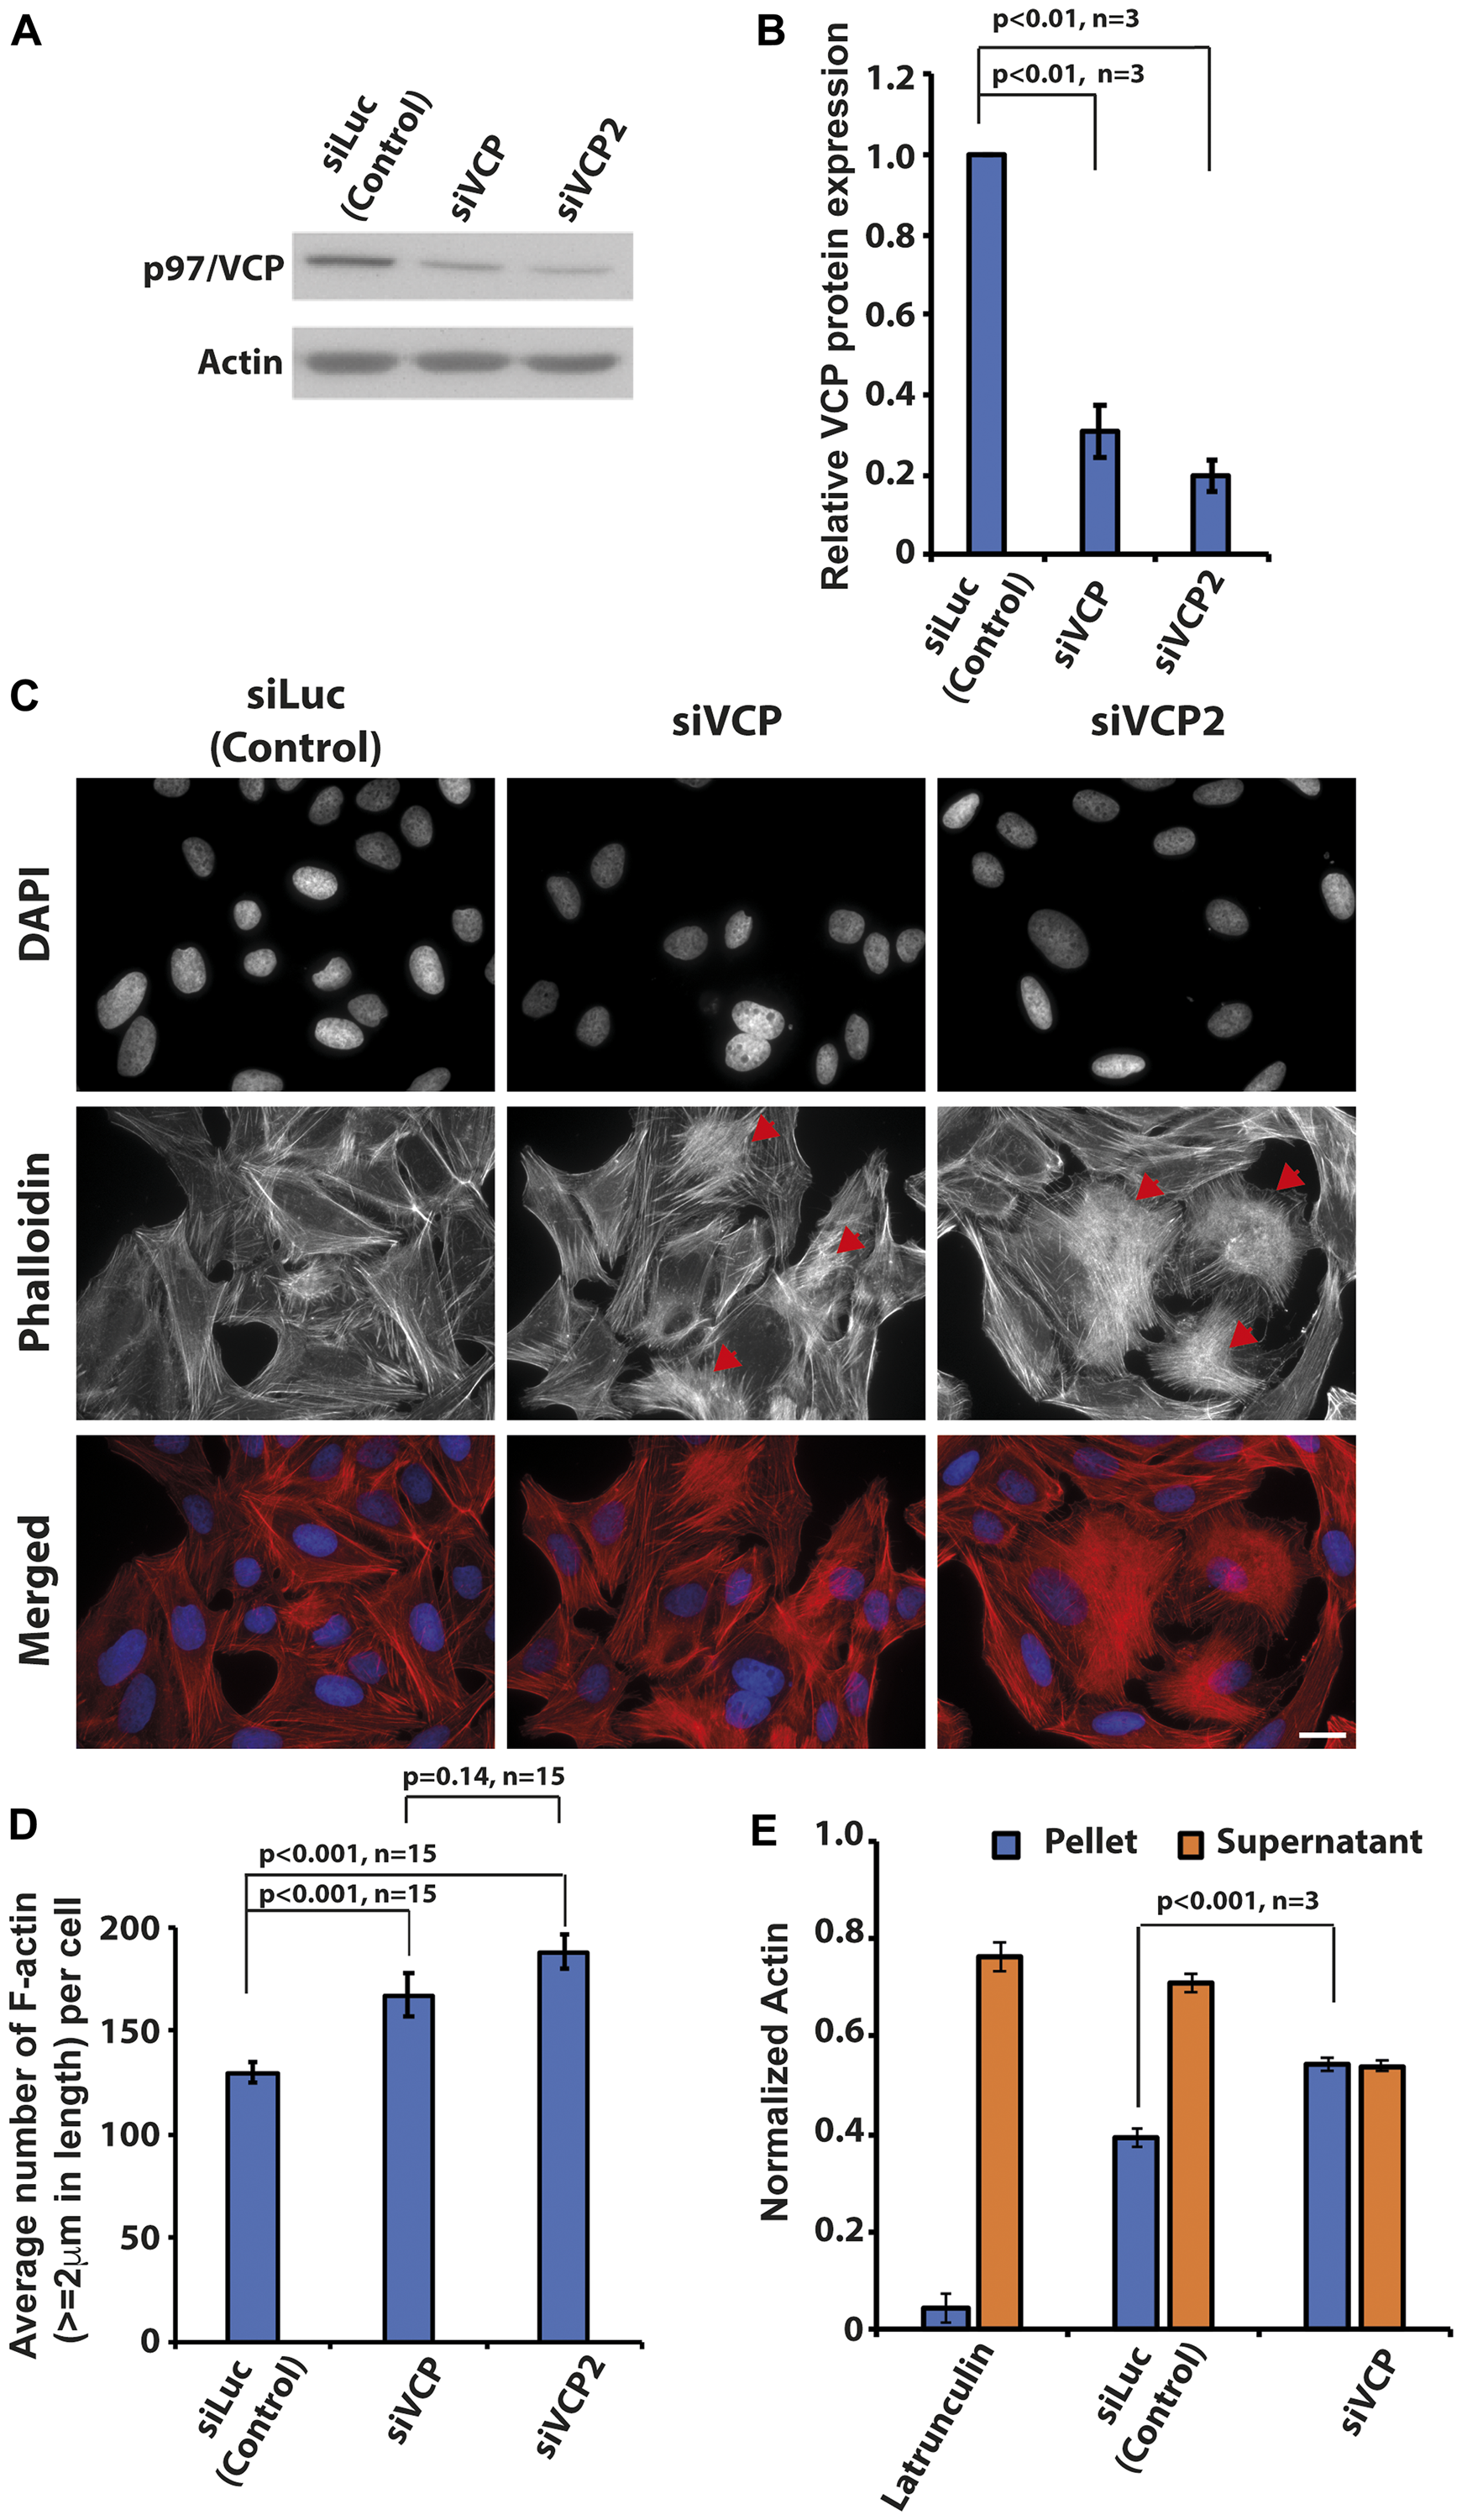 Knockdown of p97/VCP induced changes in actin morphology.